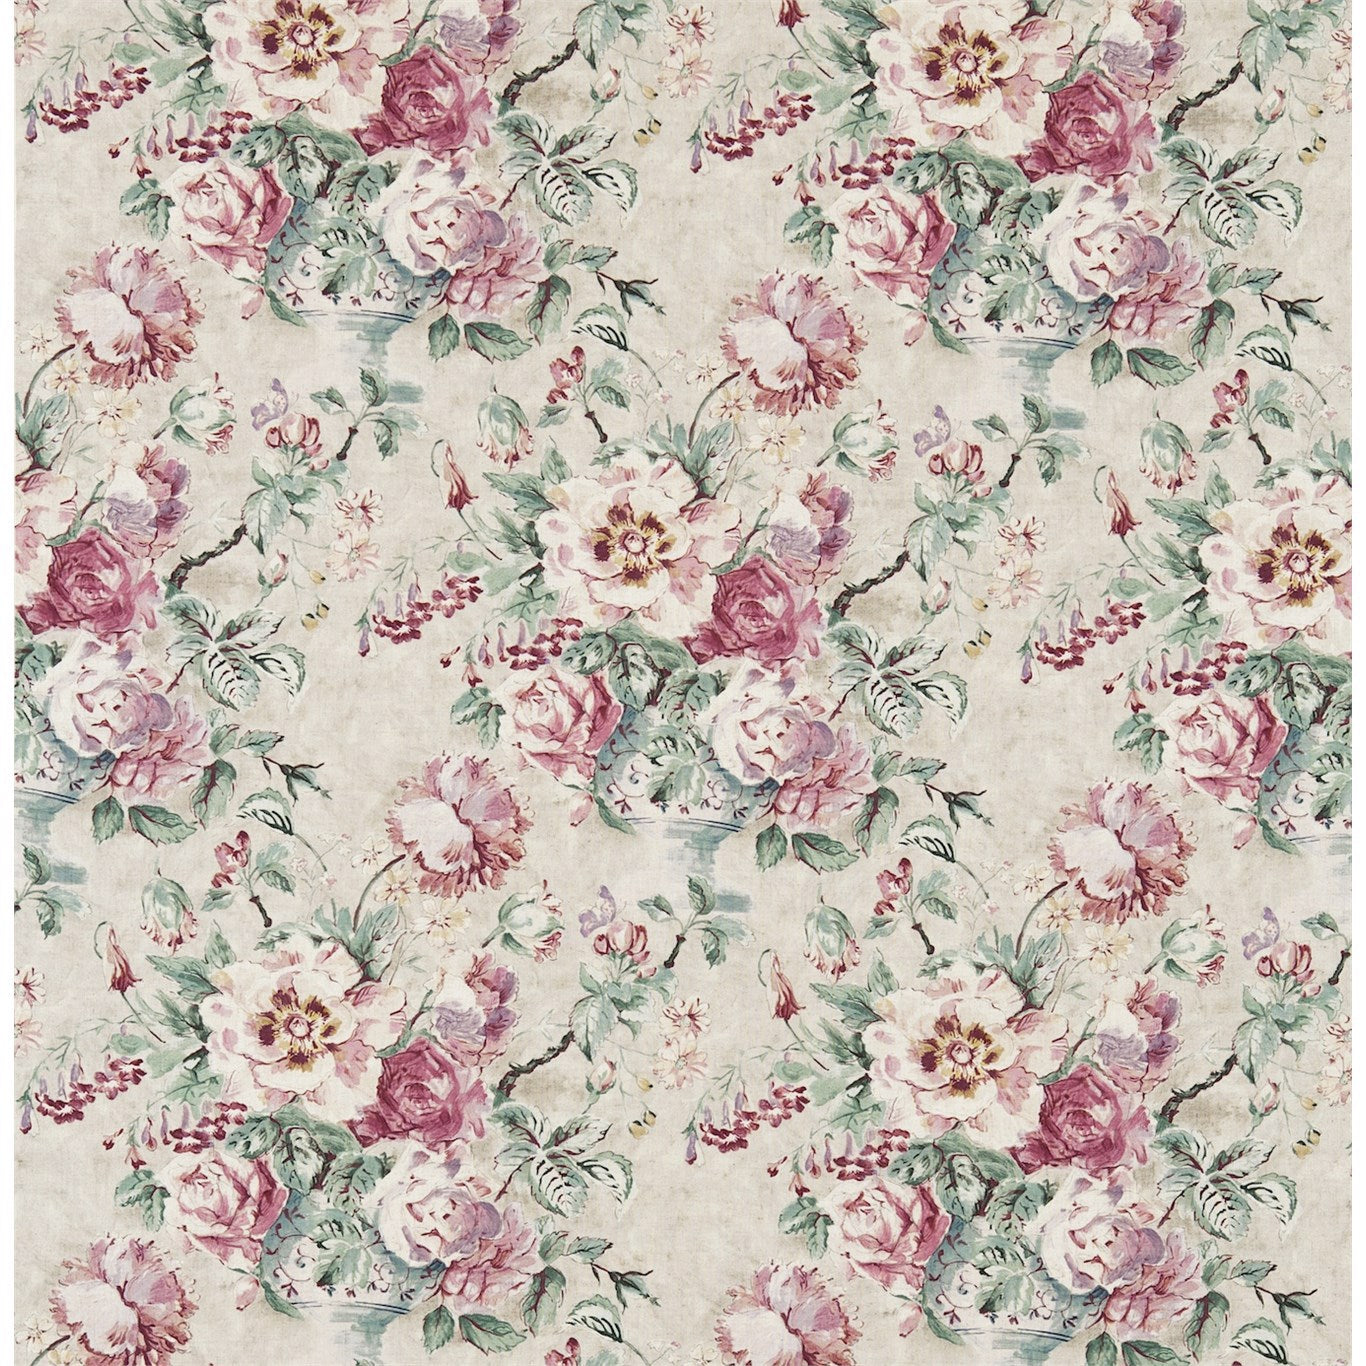 Giselle Fabric by Sanderson